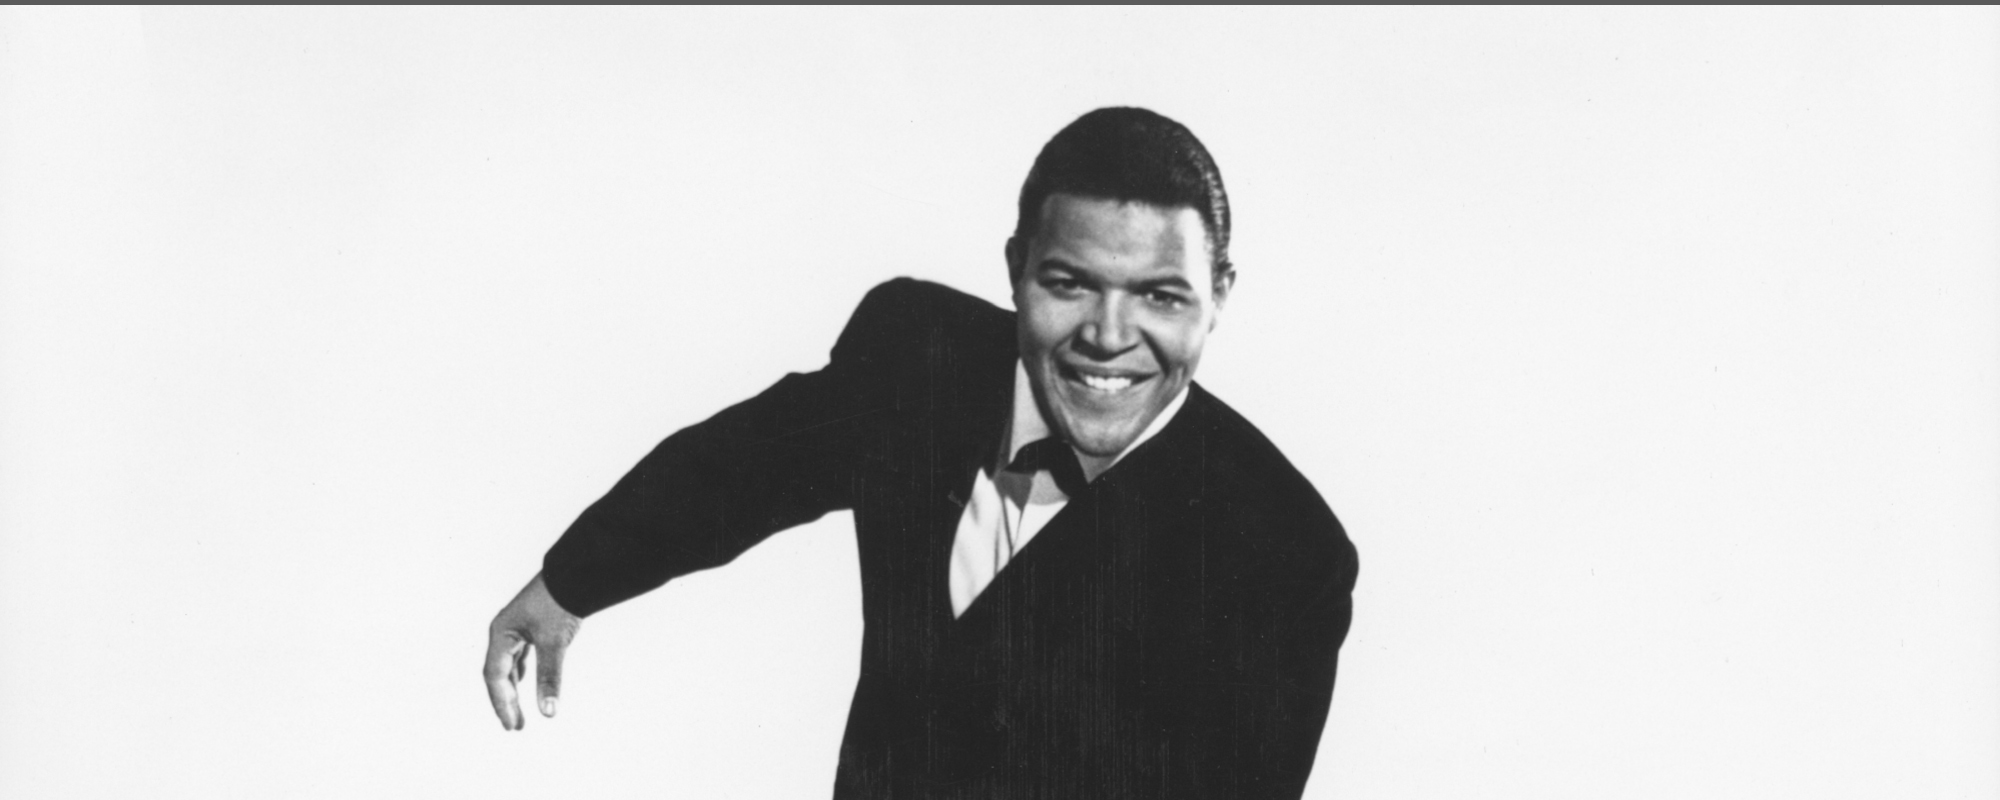 The Story Behind How “The Twist” Creator Chubby Checker Got His Name